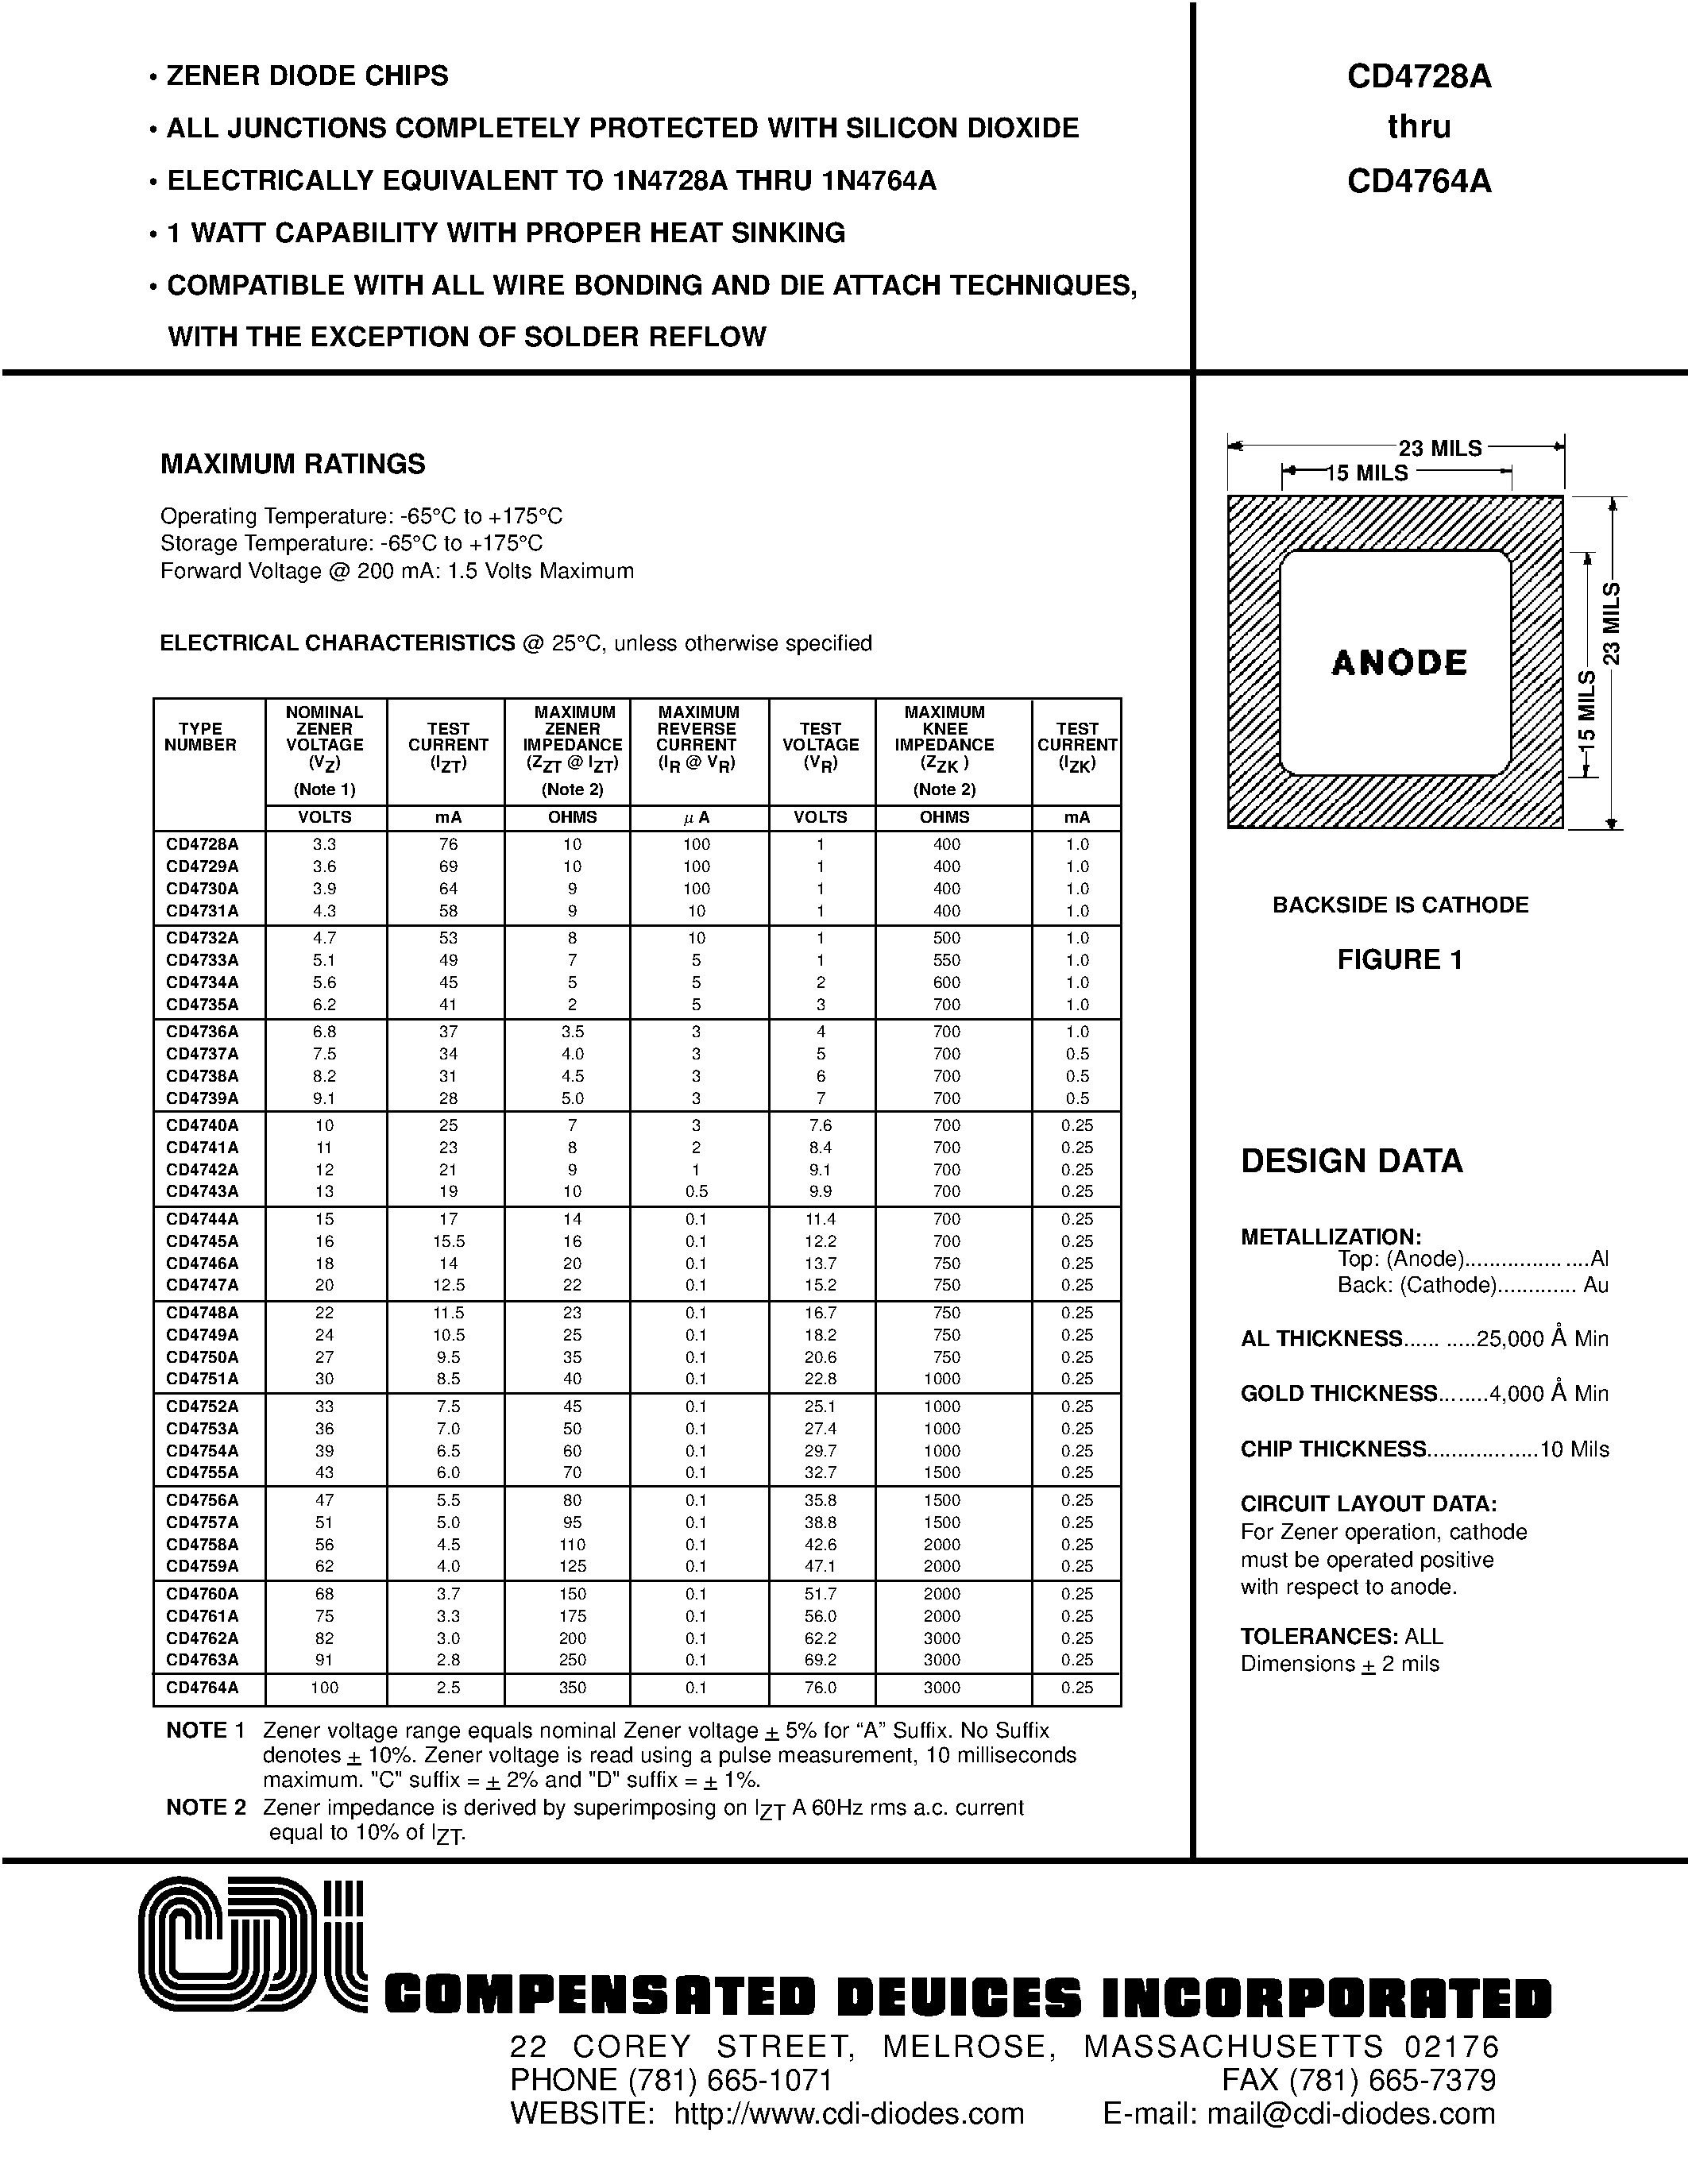 Datasheet CD4764A - ZENER DIODE CHIPS page 1